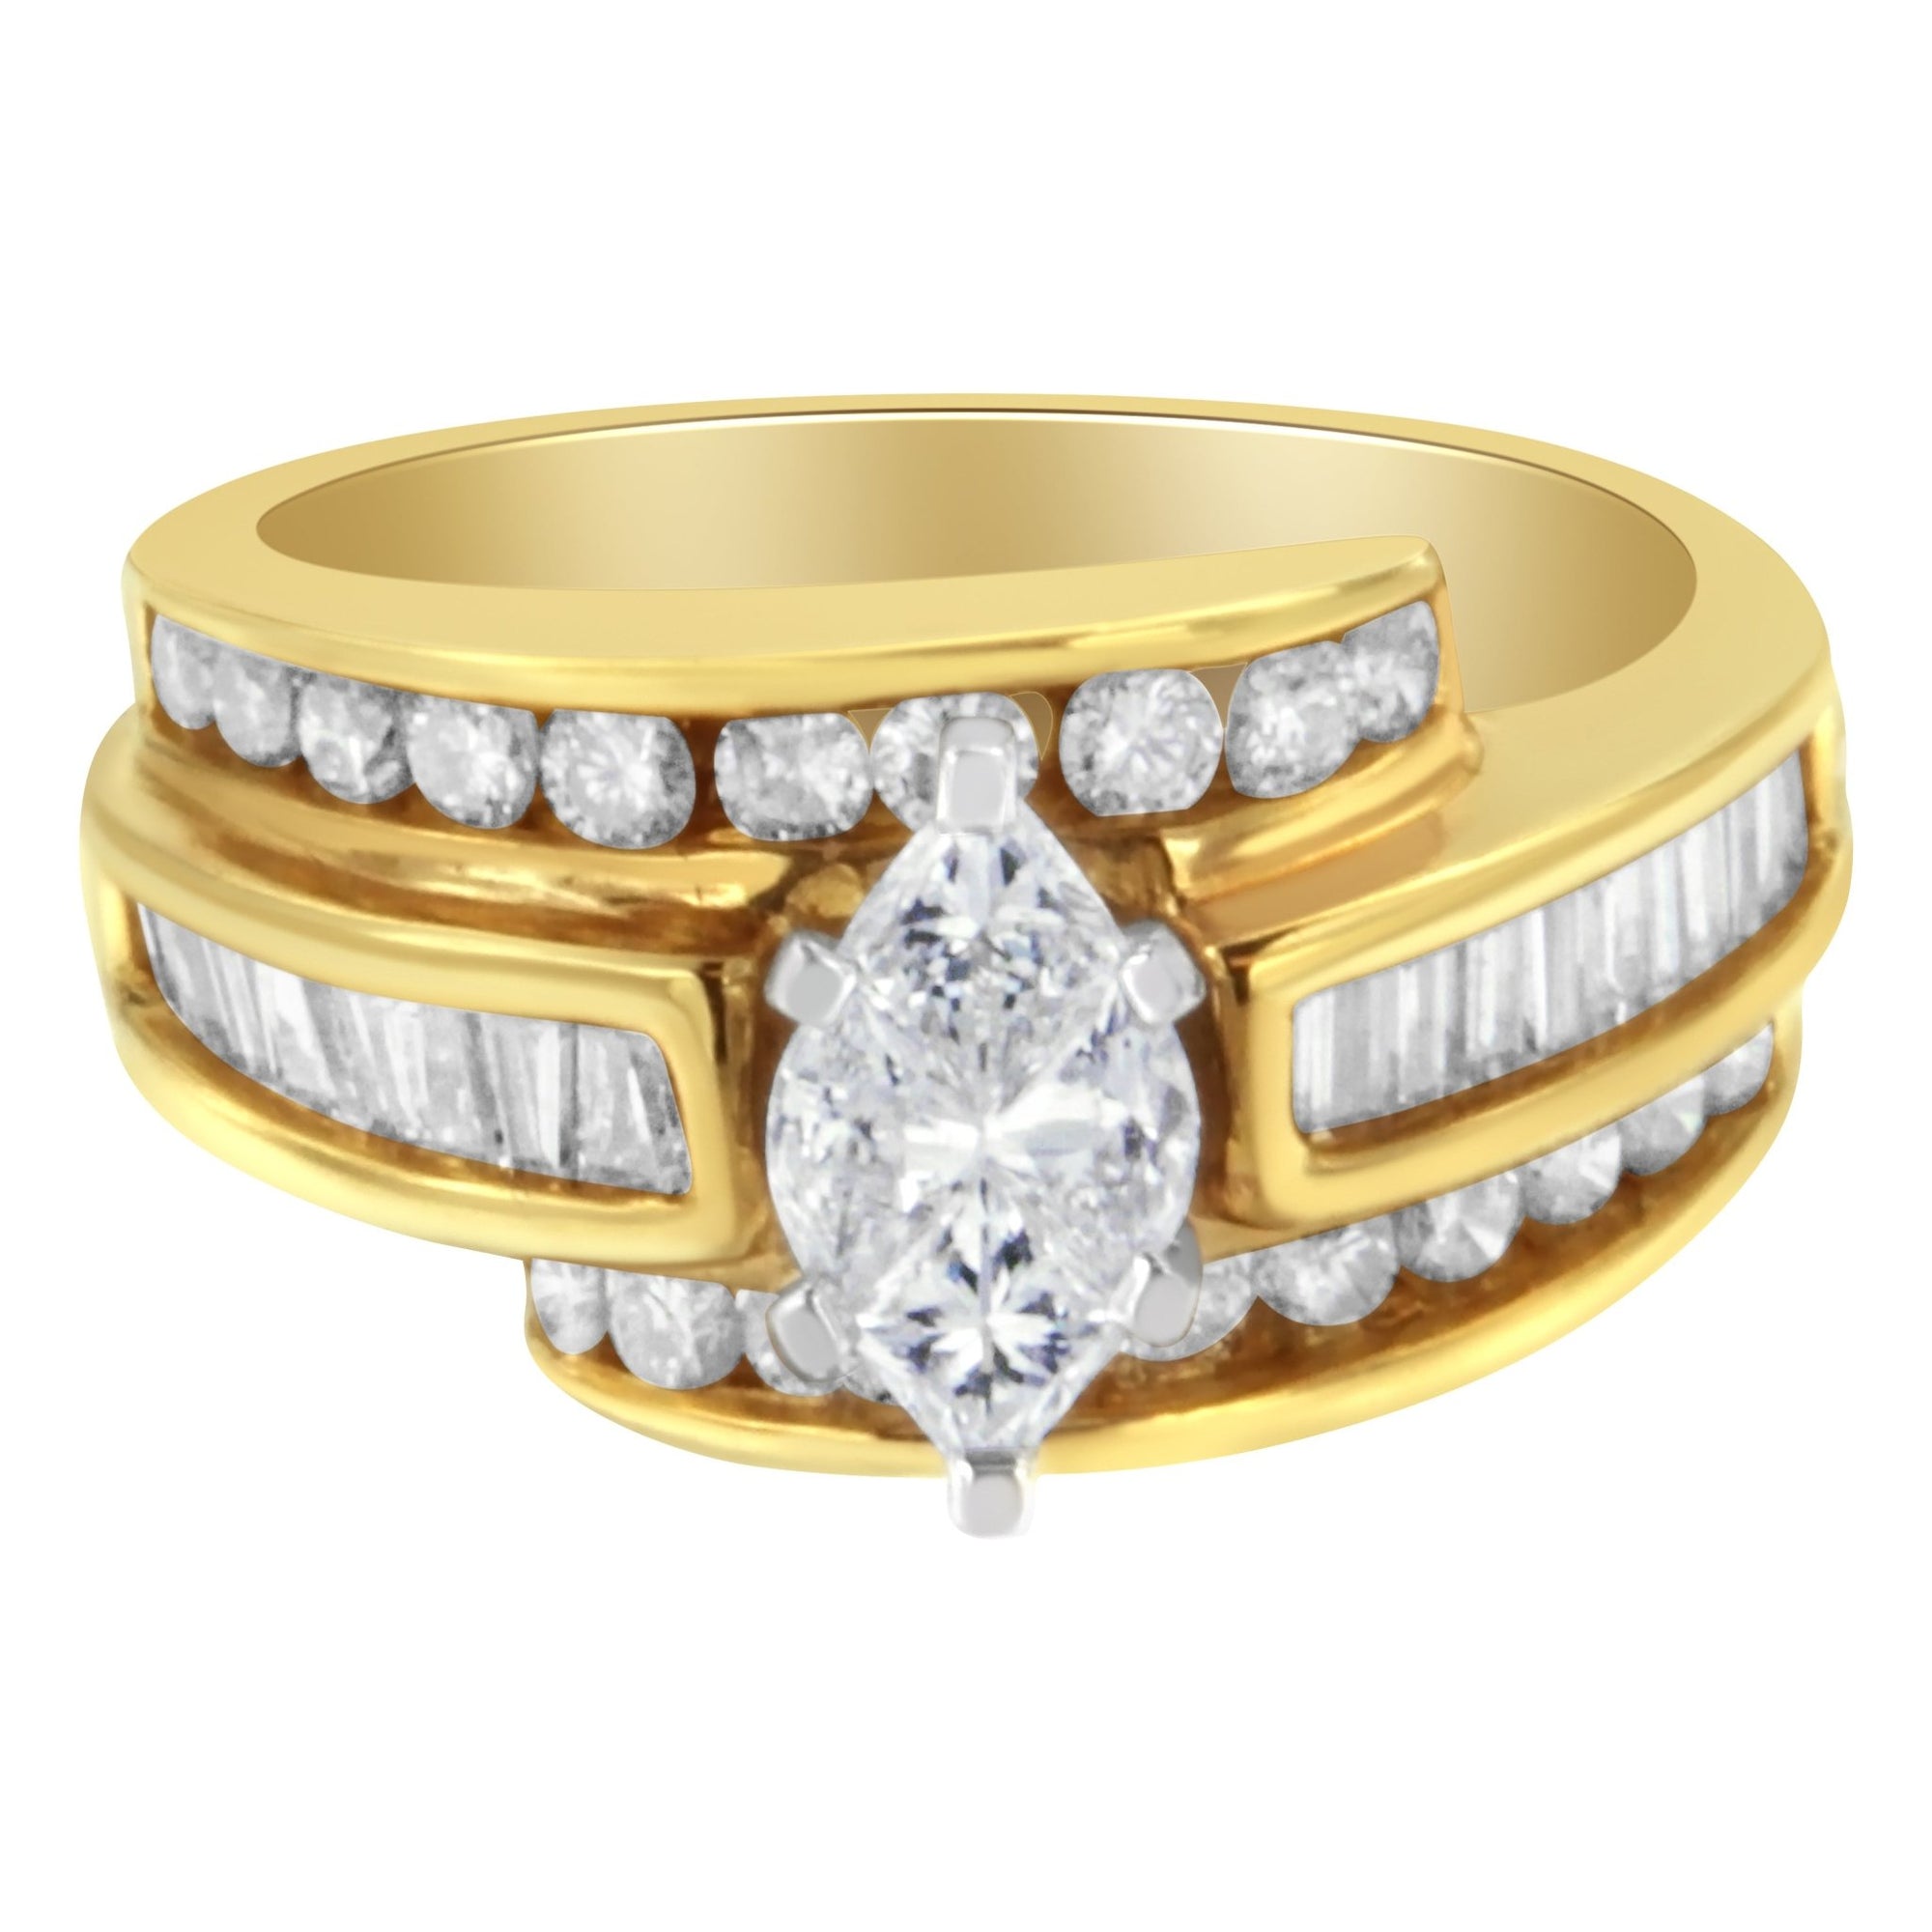 14KT Two-Toned Diamond Cocktail Ring (1 1/3 cttw, H-I Color, SI1-SI2 Clarity) - LinkagejewelrydesignLinkagejewelrydesign